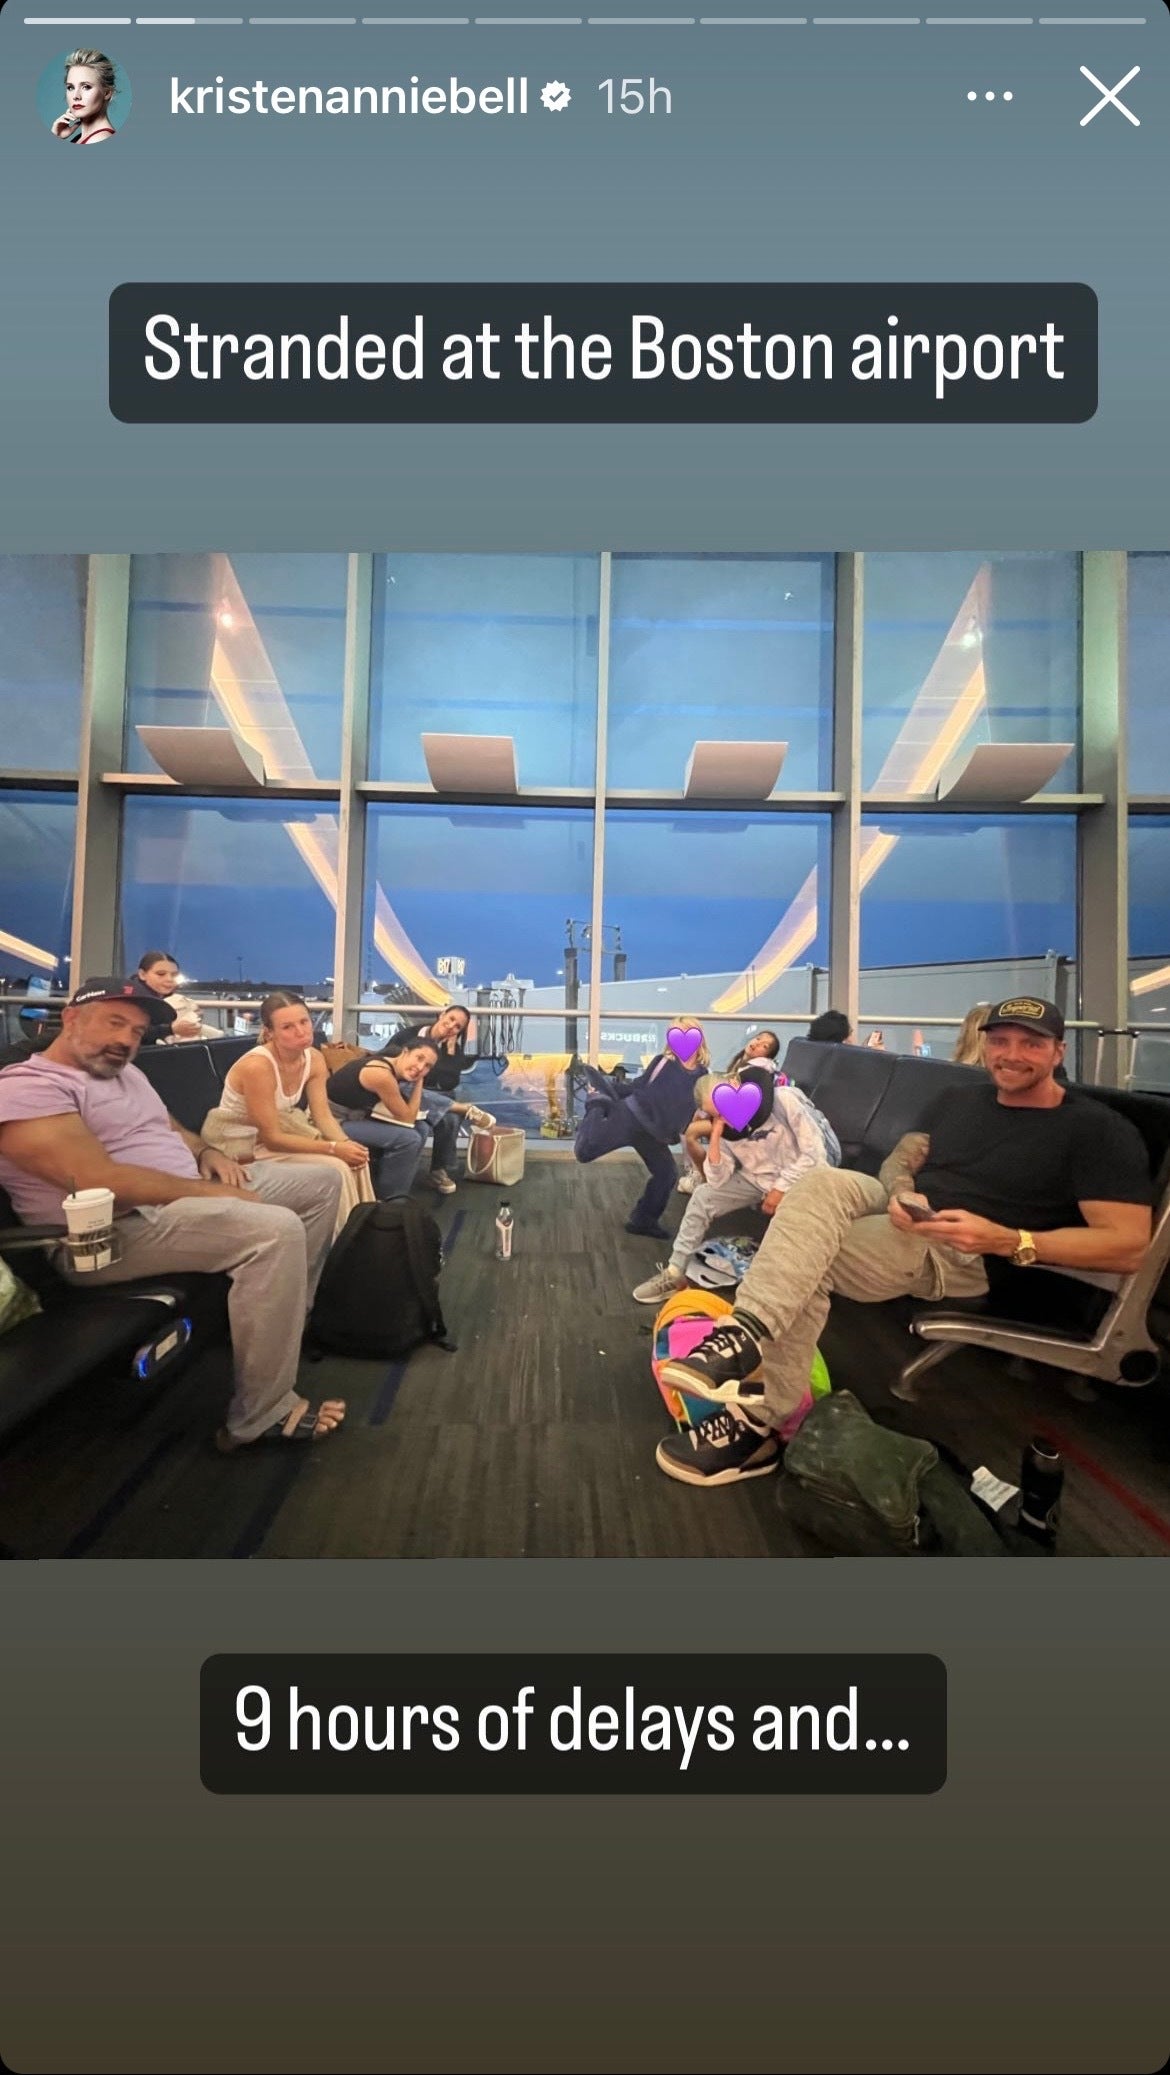 Kristen Bell "stranded at the Boston airport" with family and friends from her Instagram